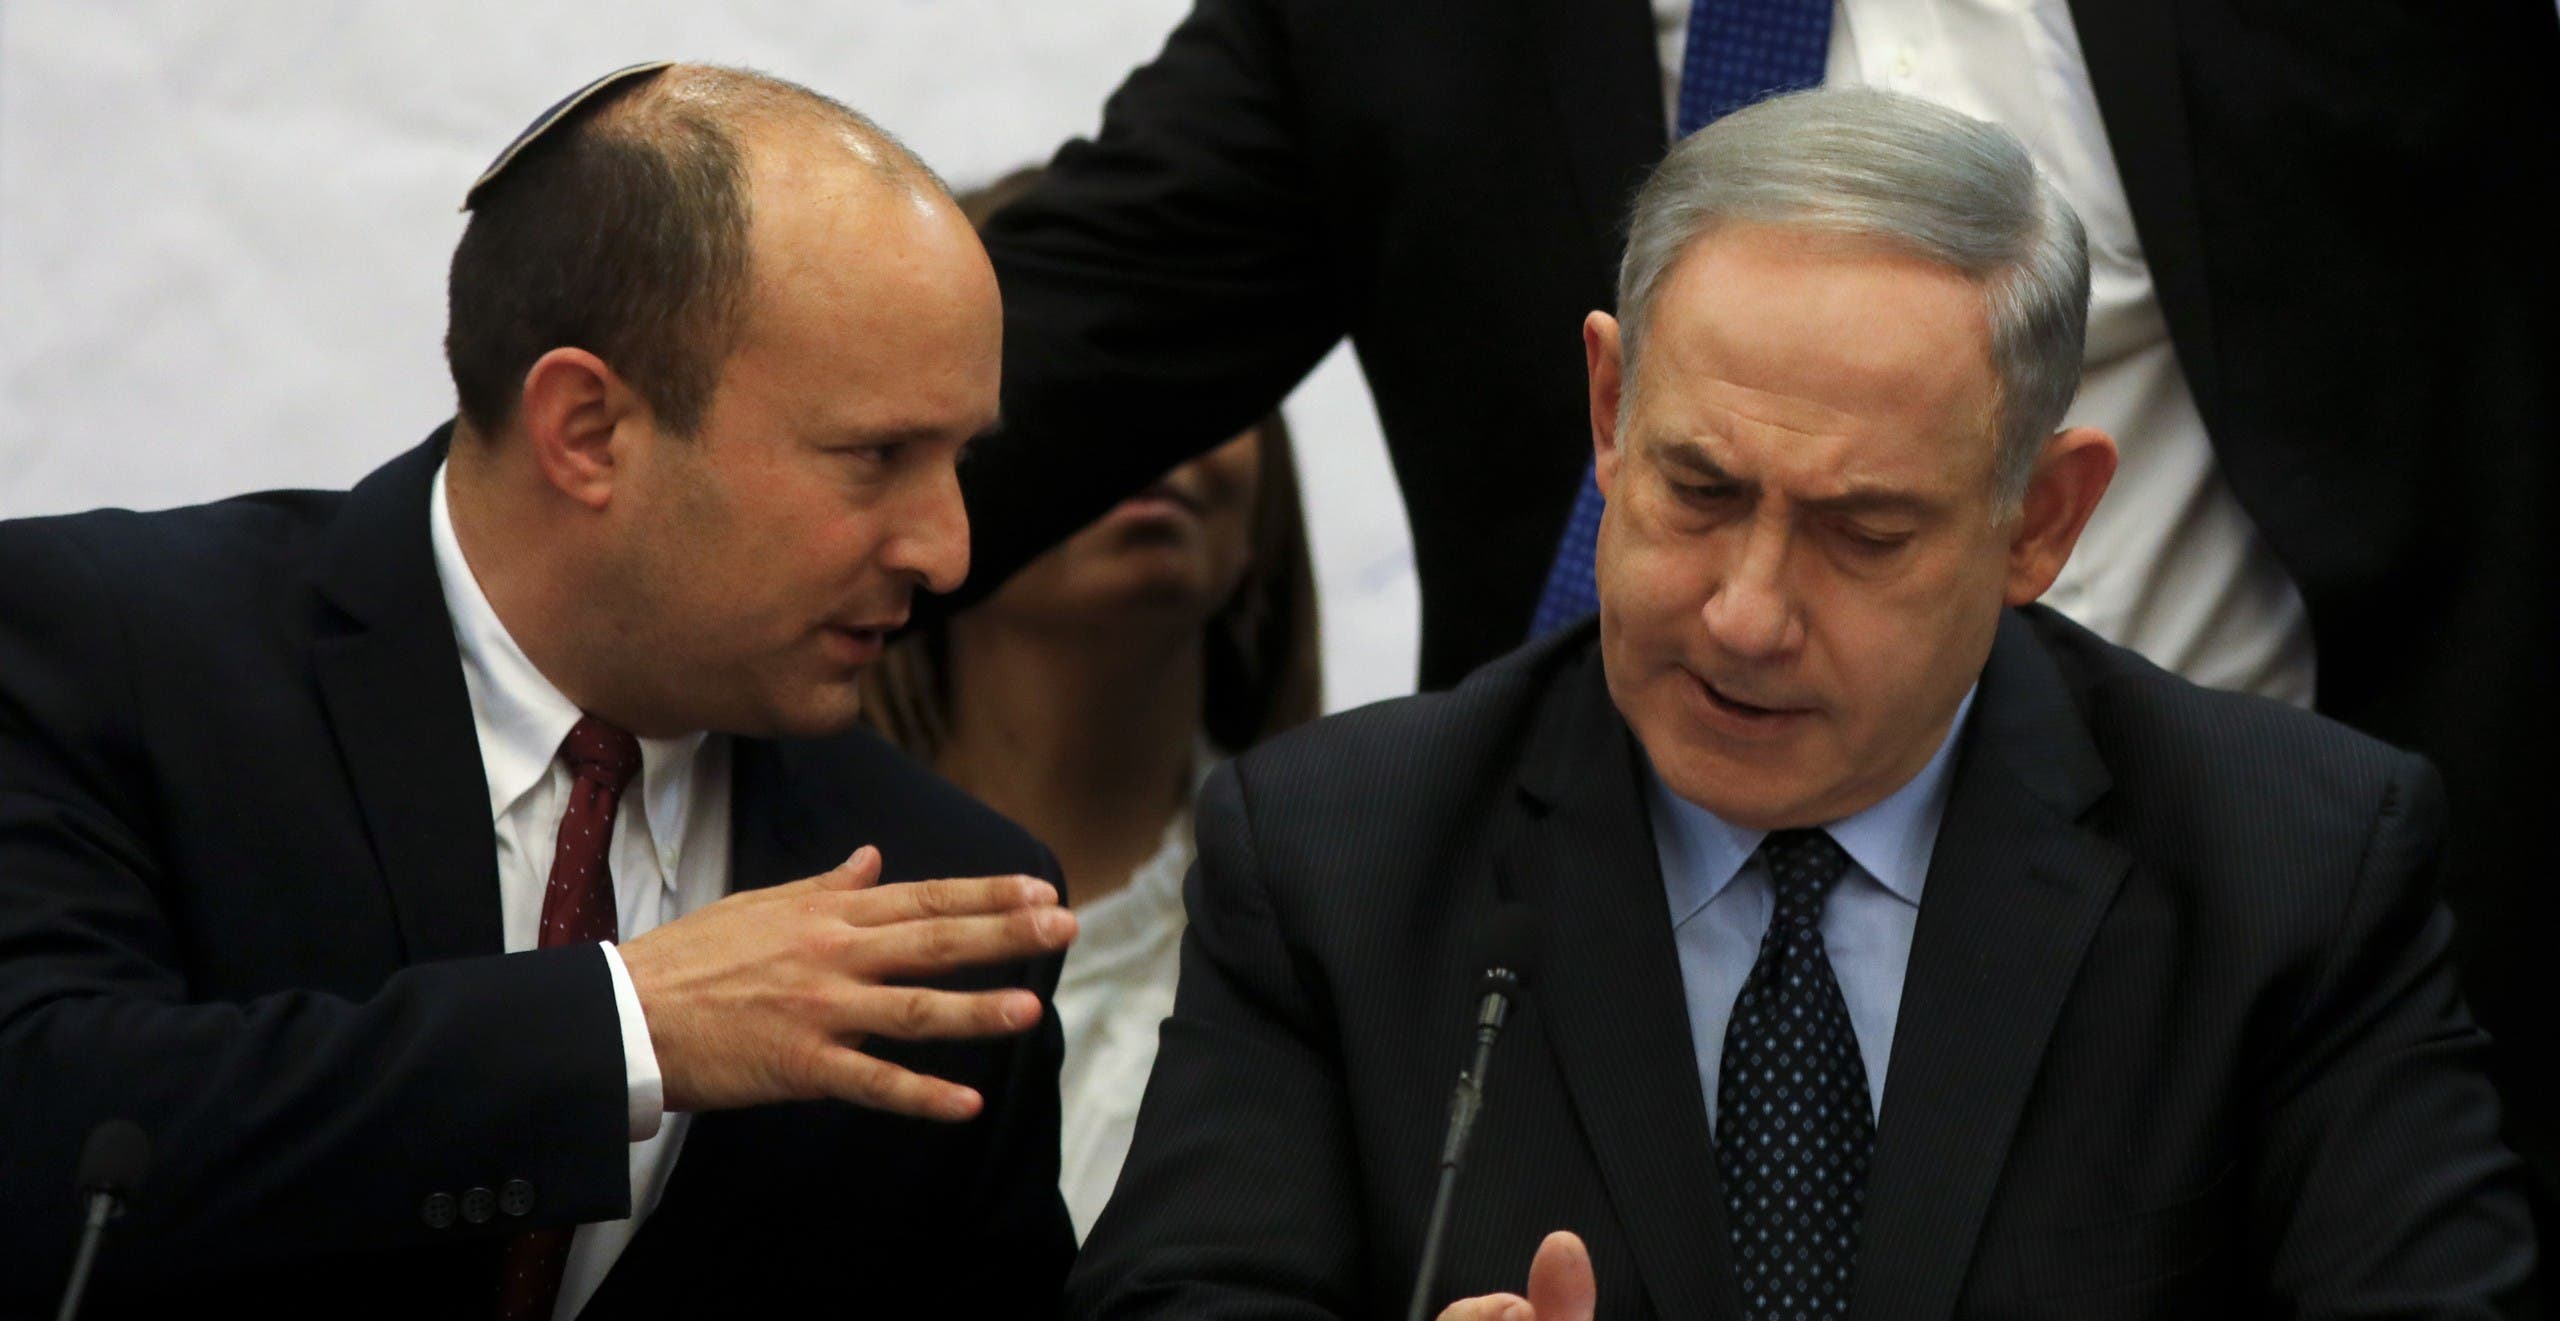 Prime Minister Benjamin Netanyahu (R) and Defense Minister Naftali Bennett, attend a meetin at the Knesset (parliament) in Jerusalem, on March 4, 2020. (AFP)